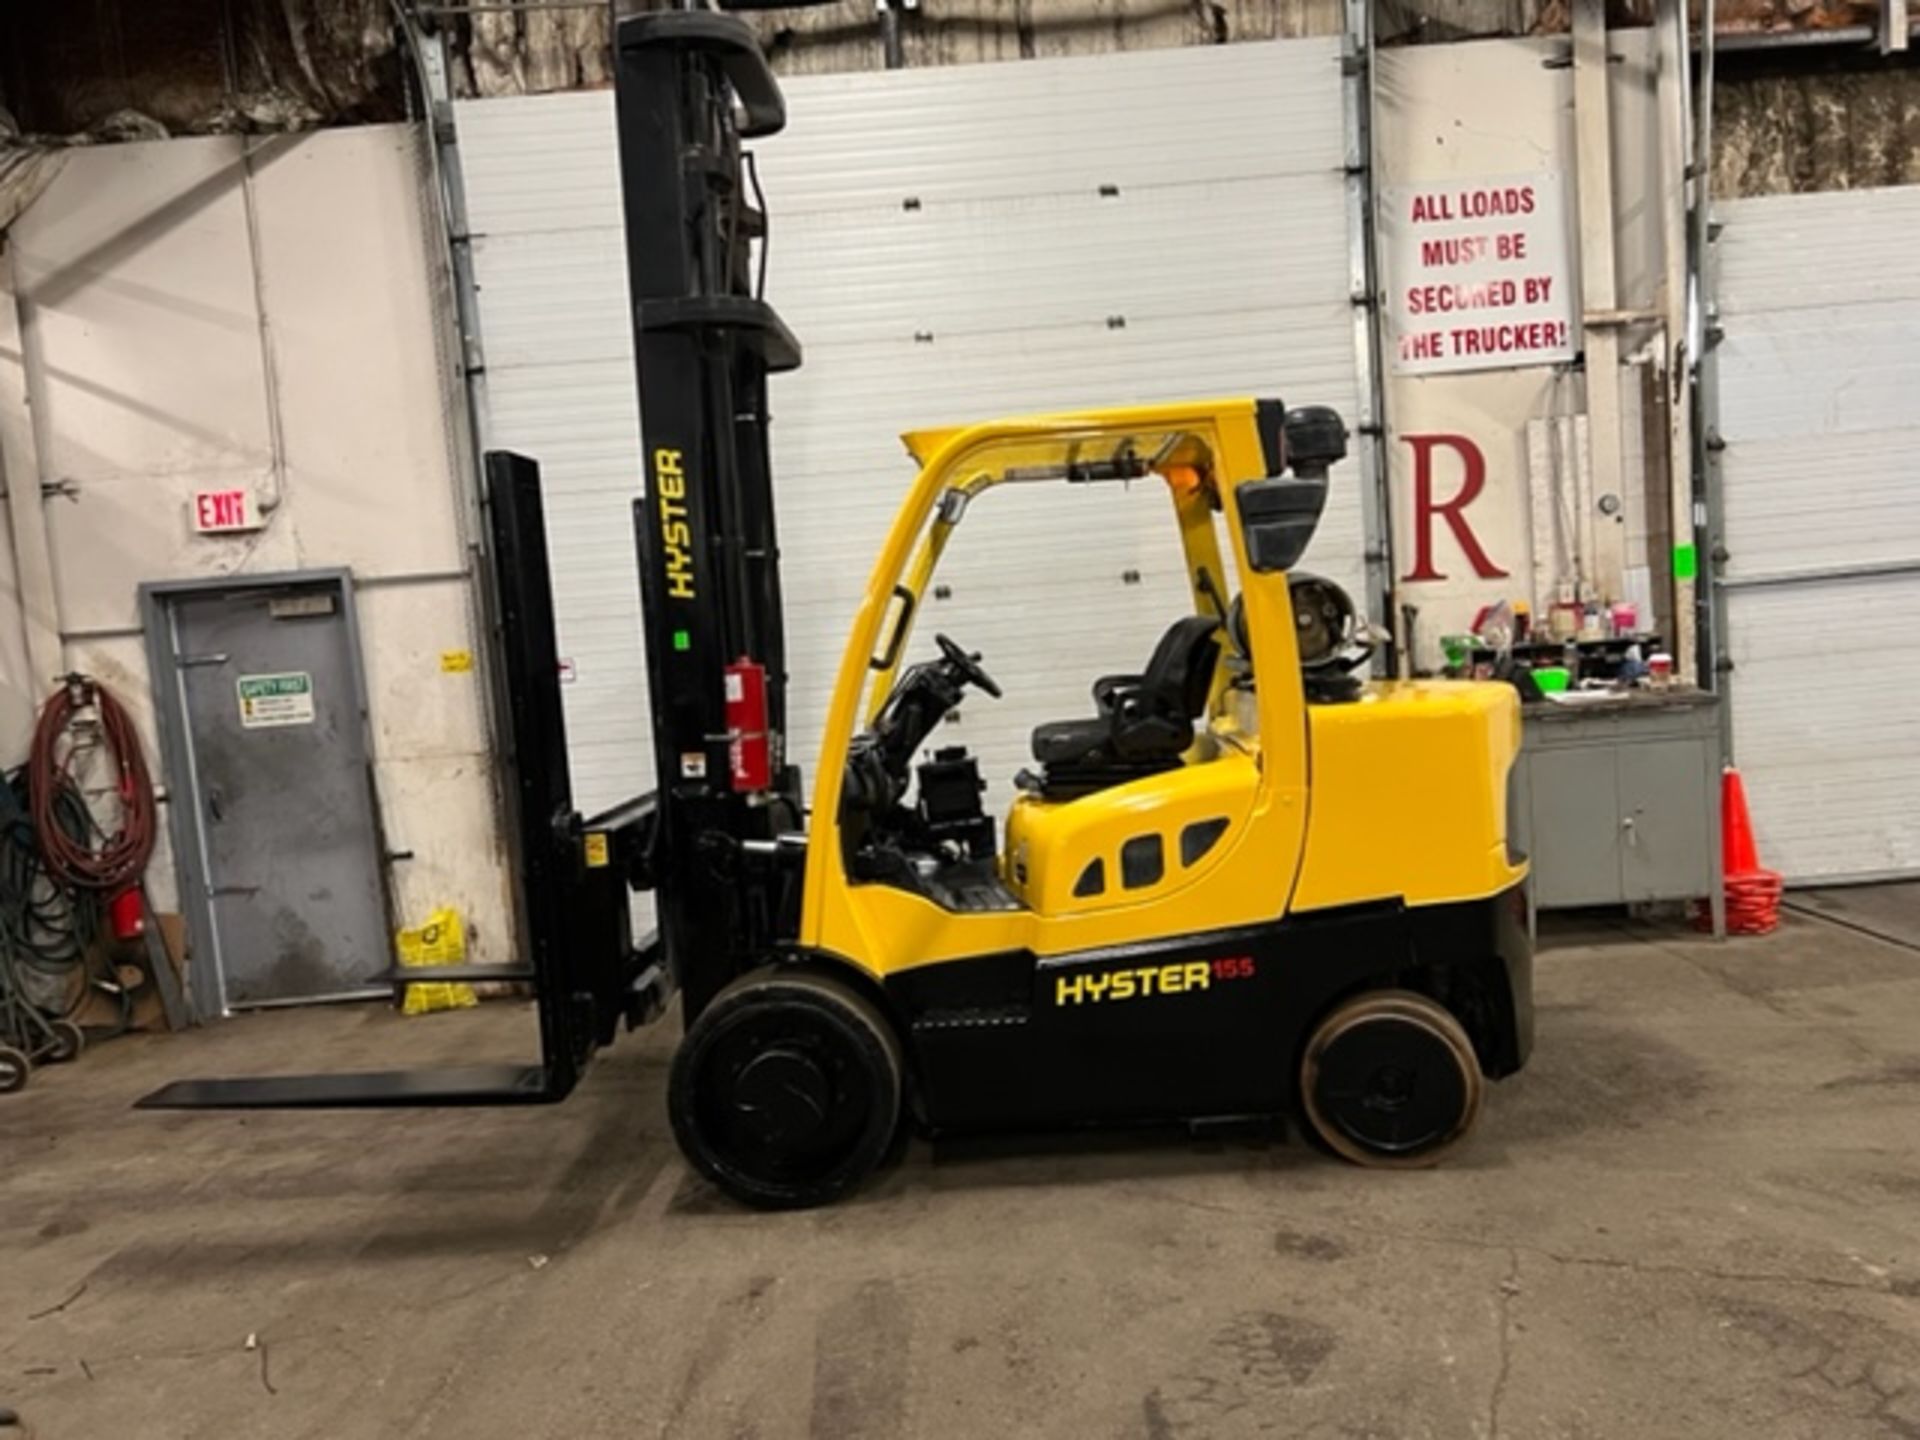 FREE CUSTOMS - 2011 Hyster model 155 15,500lbs Capacity Forklift LPG (propane) with SIDESHIFT (no